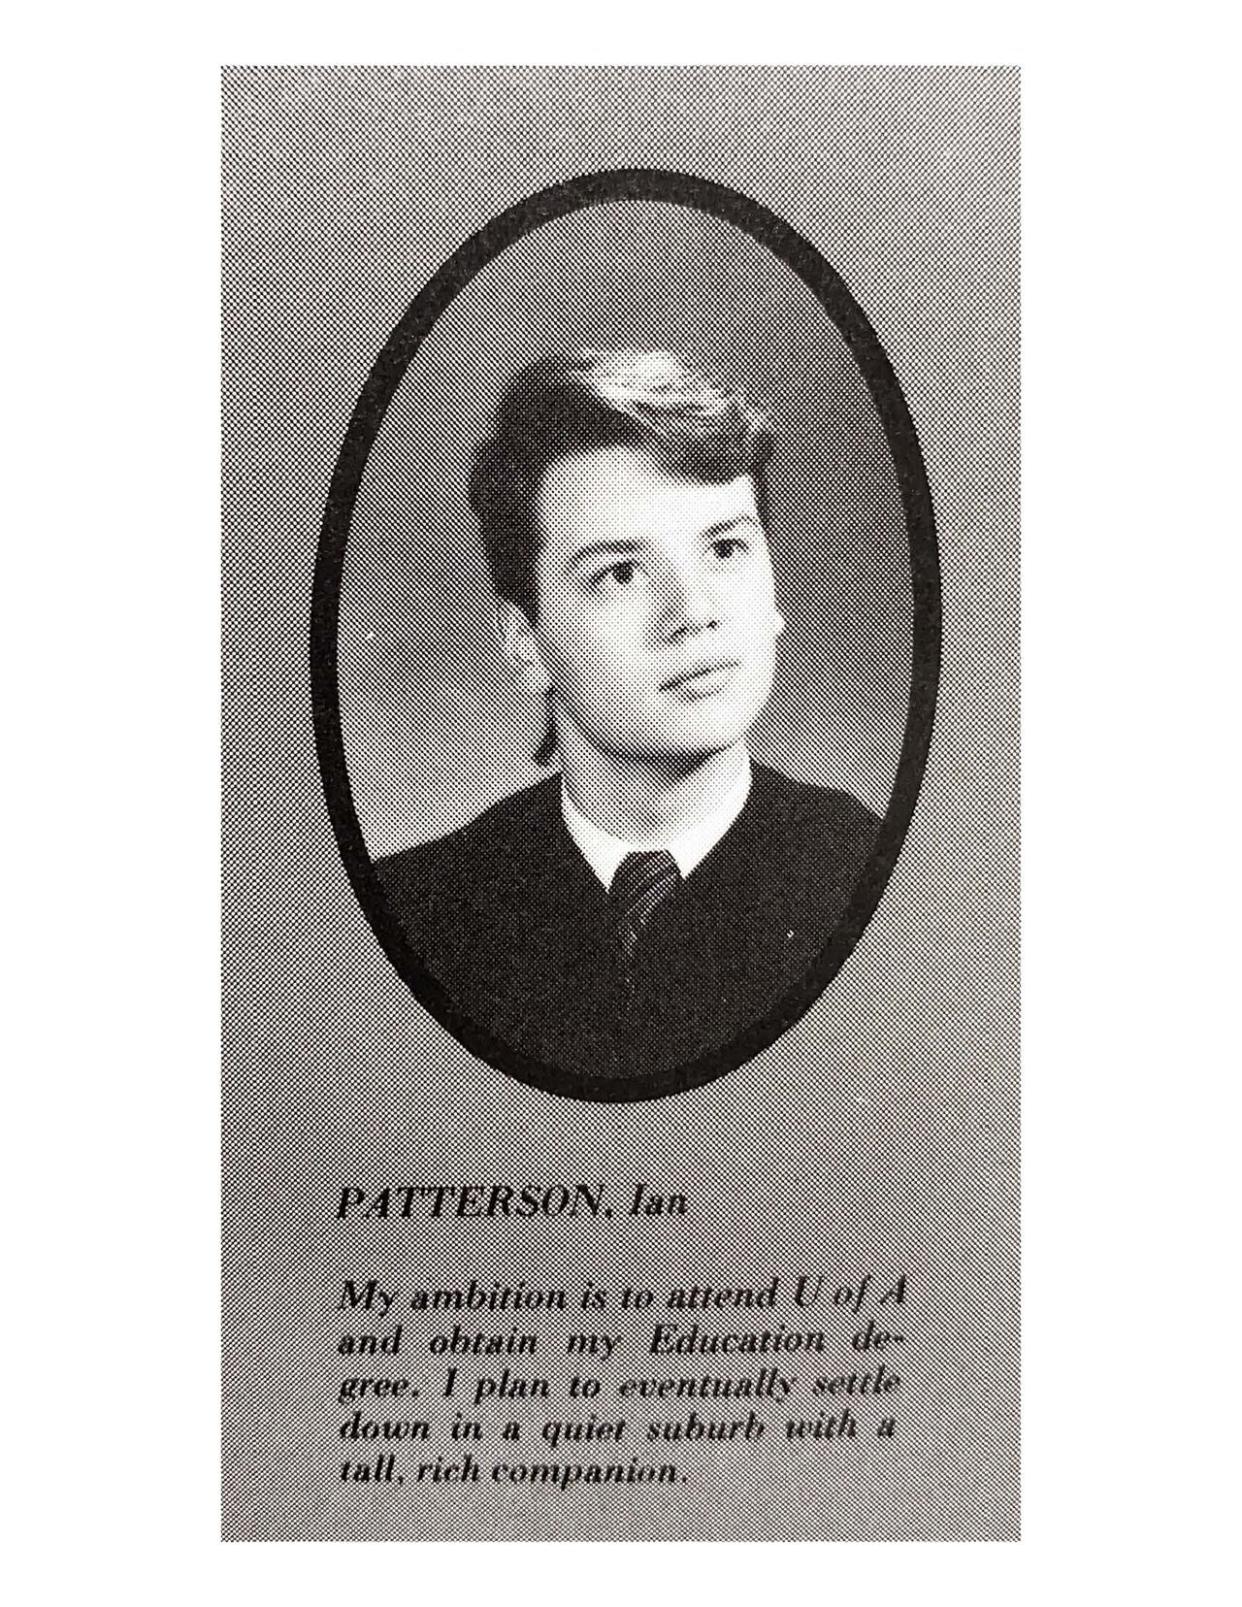 Ian Paterson's yearbook photo. The quote underneath states that, 'My ambition is to attend U of A and obtain my education degree. I plan to eventually settle down in a quiet suburb with a tall, rich companion.